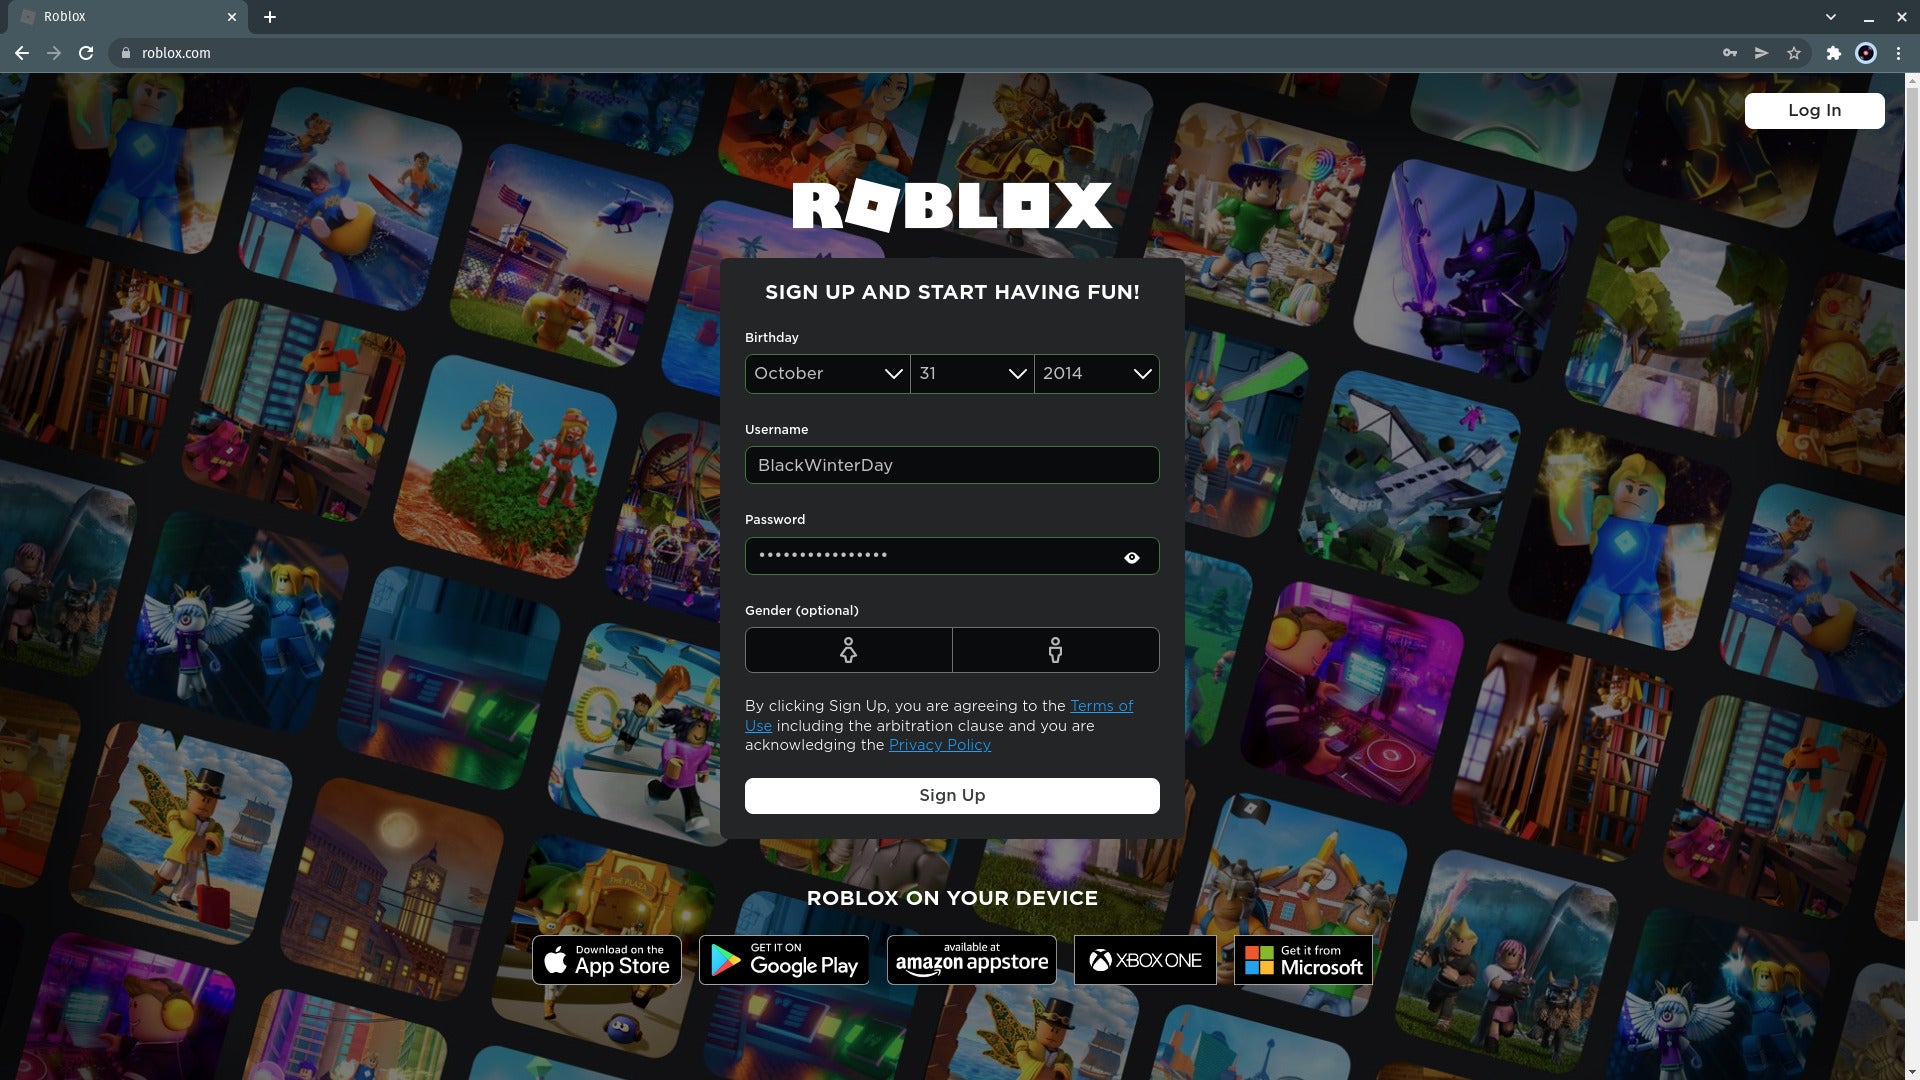 Roblox sign-up screen